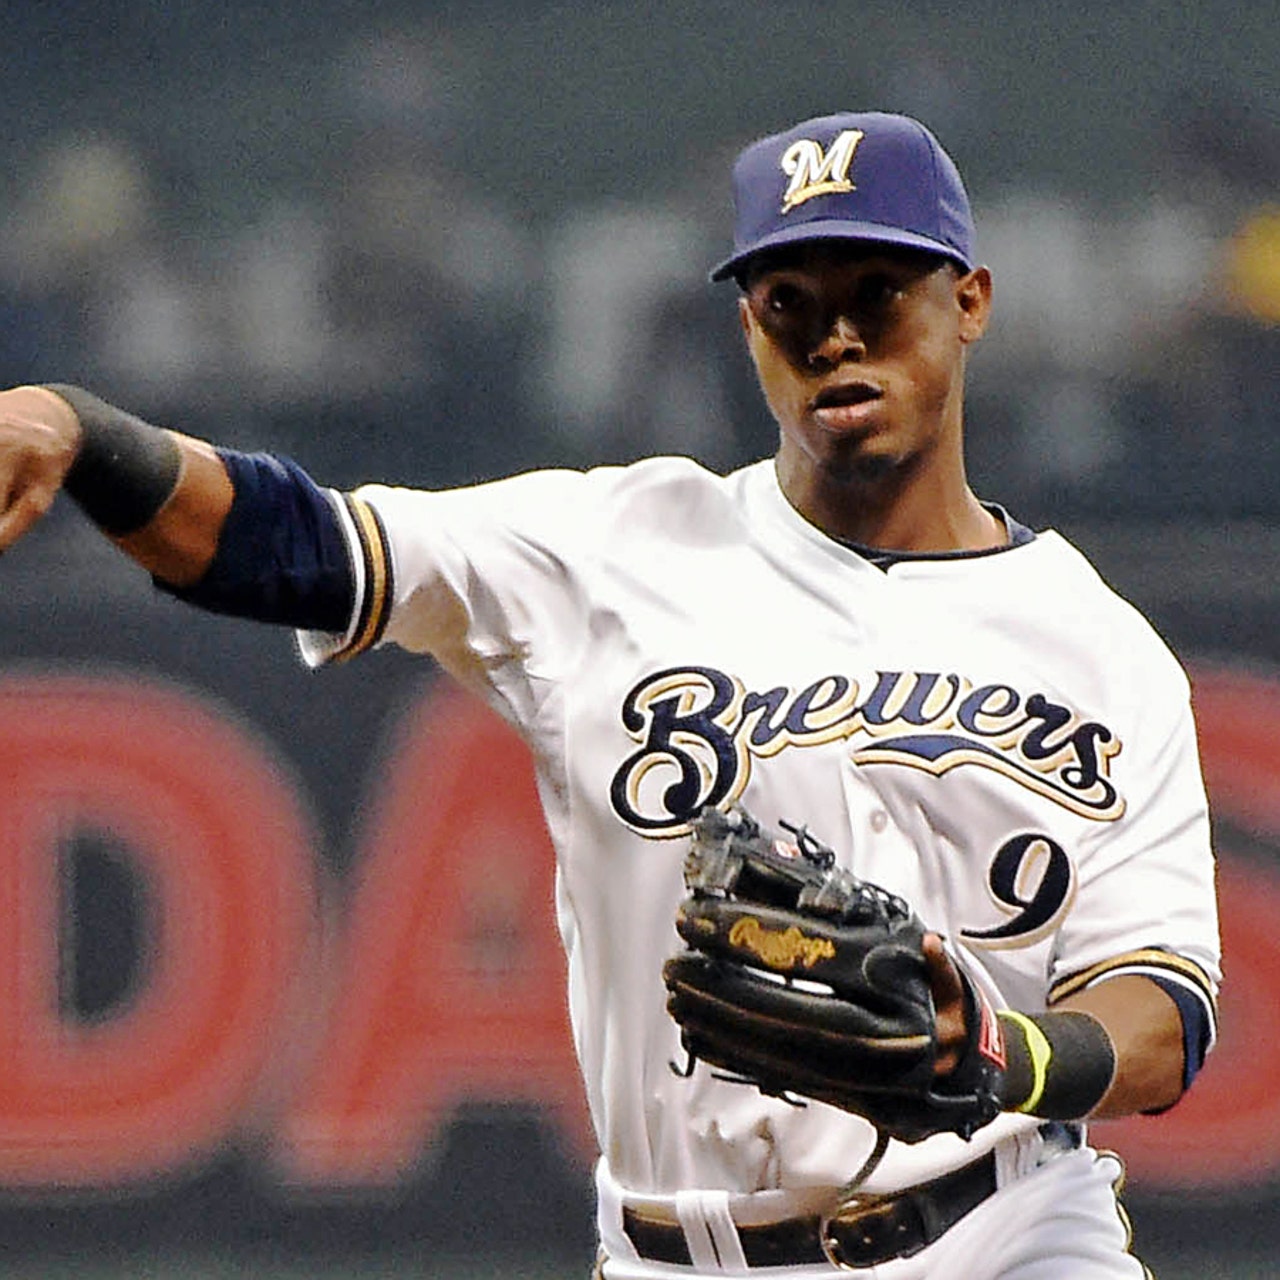 Brewers: Jean Segura To Sign 2 Year Contract With Marlins